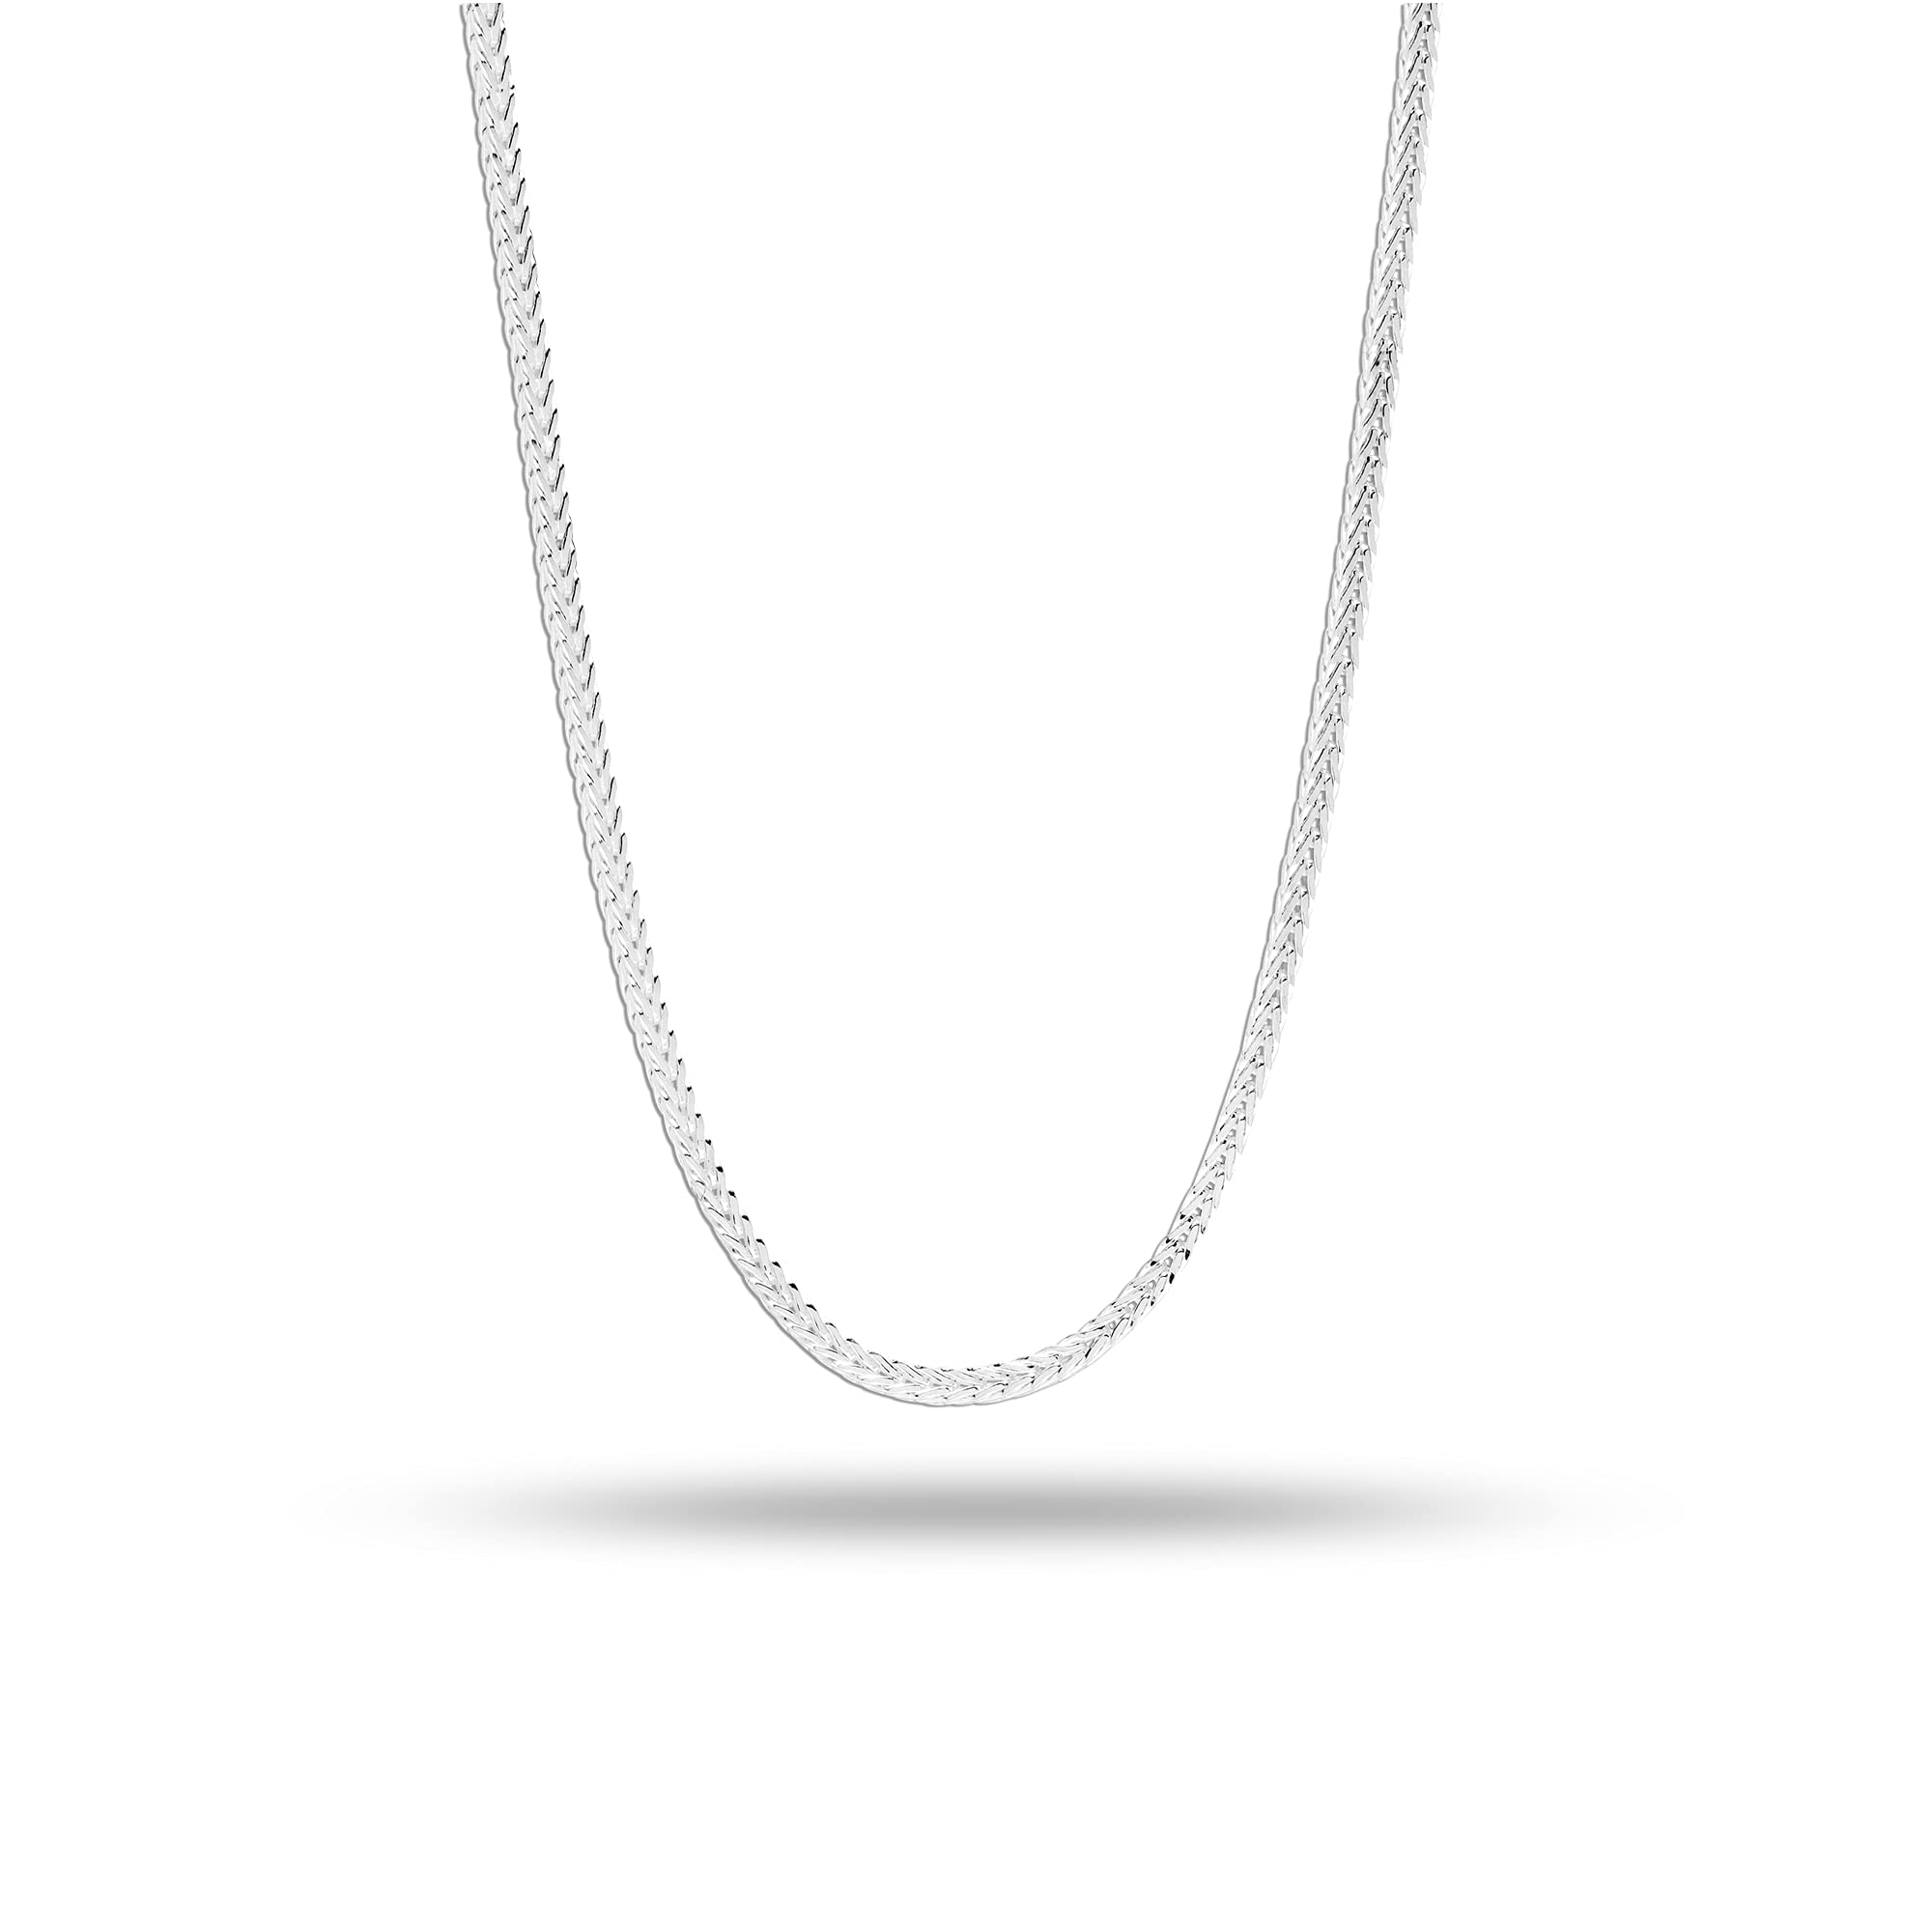 925 Sterling Silver Italian Adjustable Fox Tail Spiga Chain Necklace for Women 24 Inches